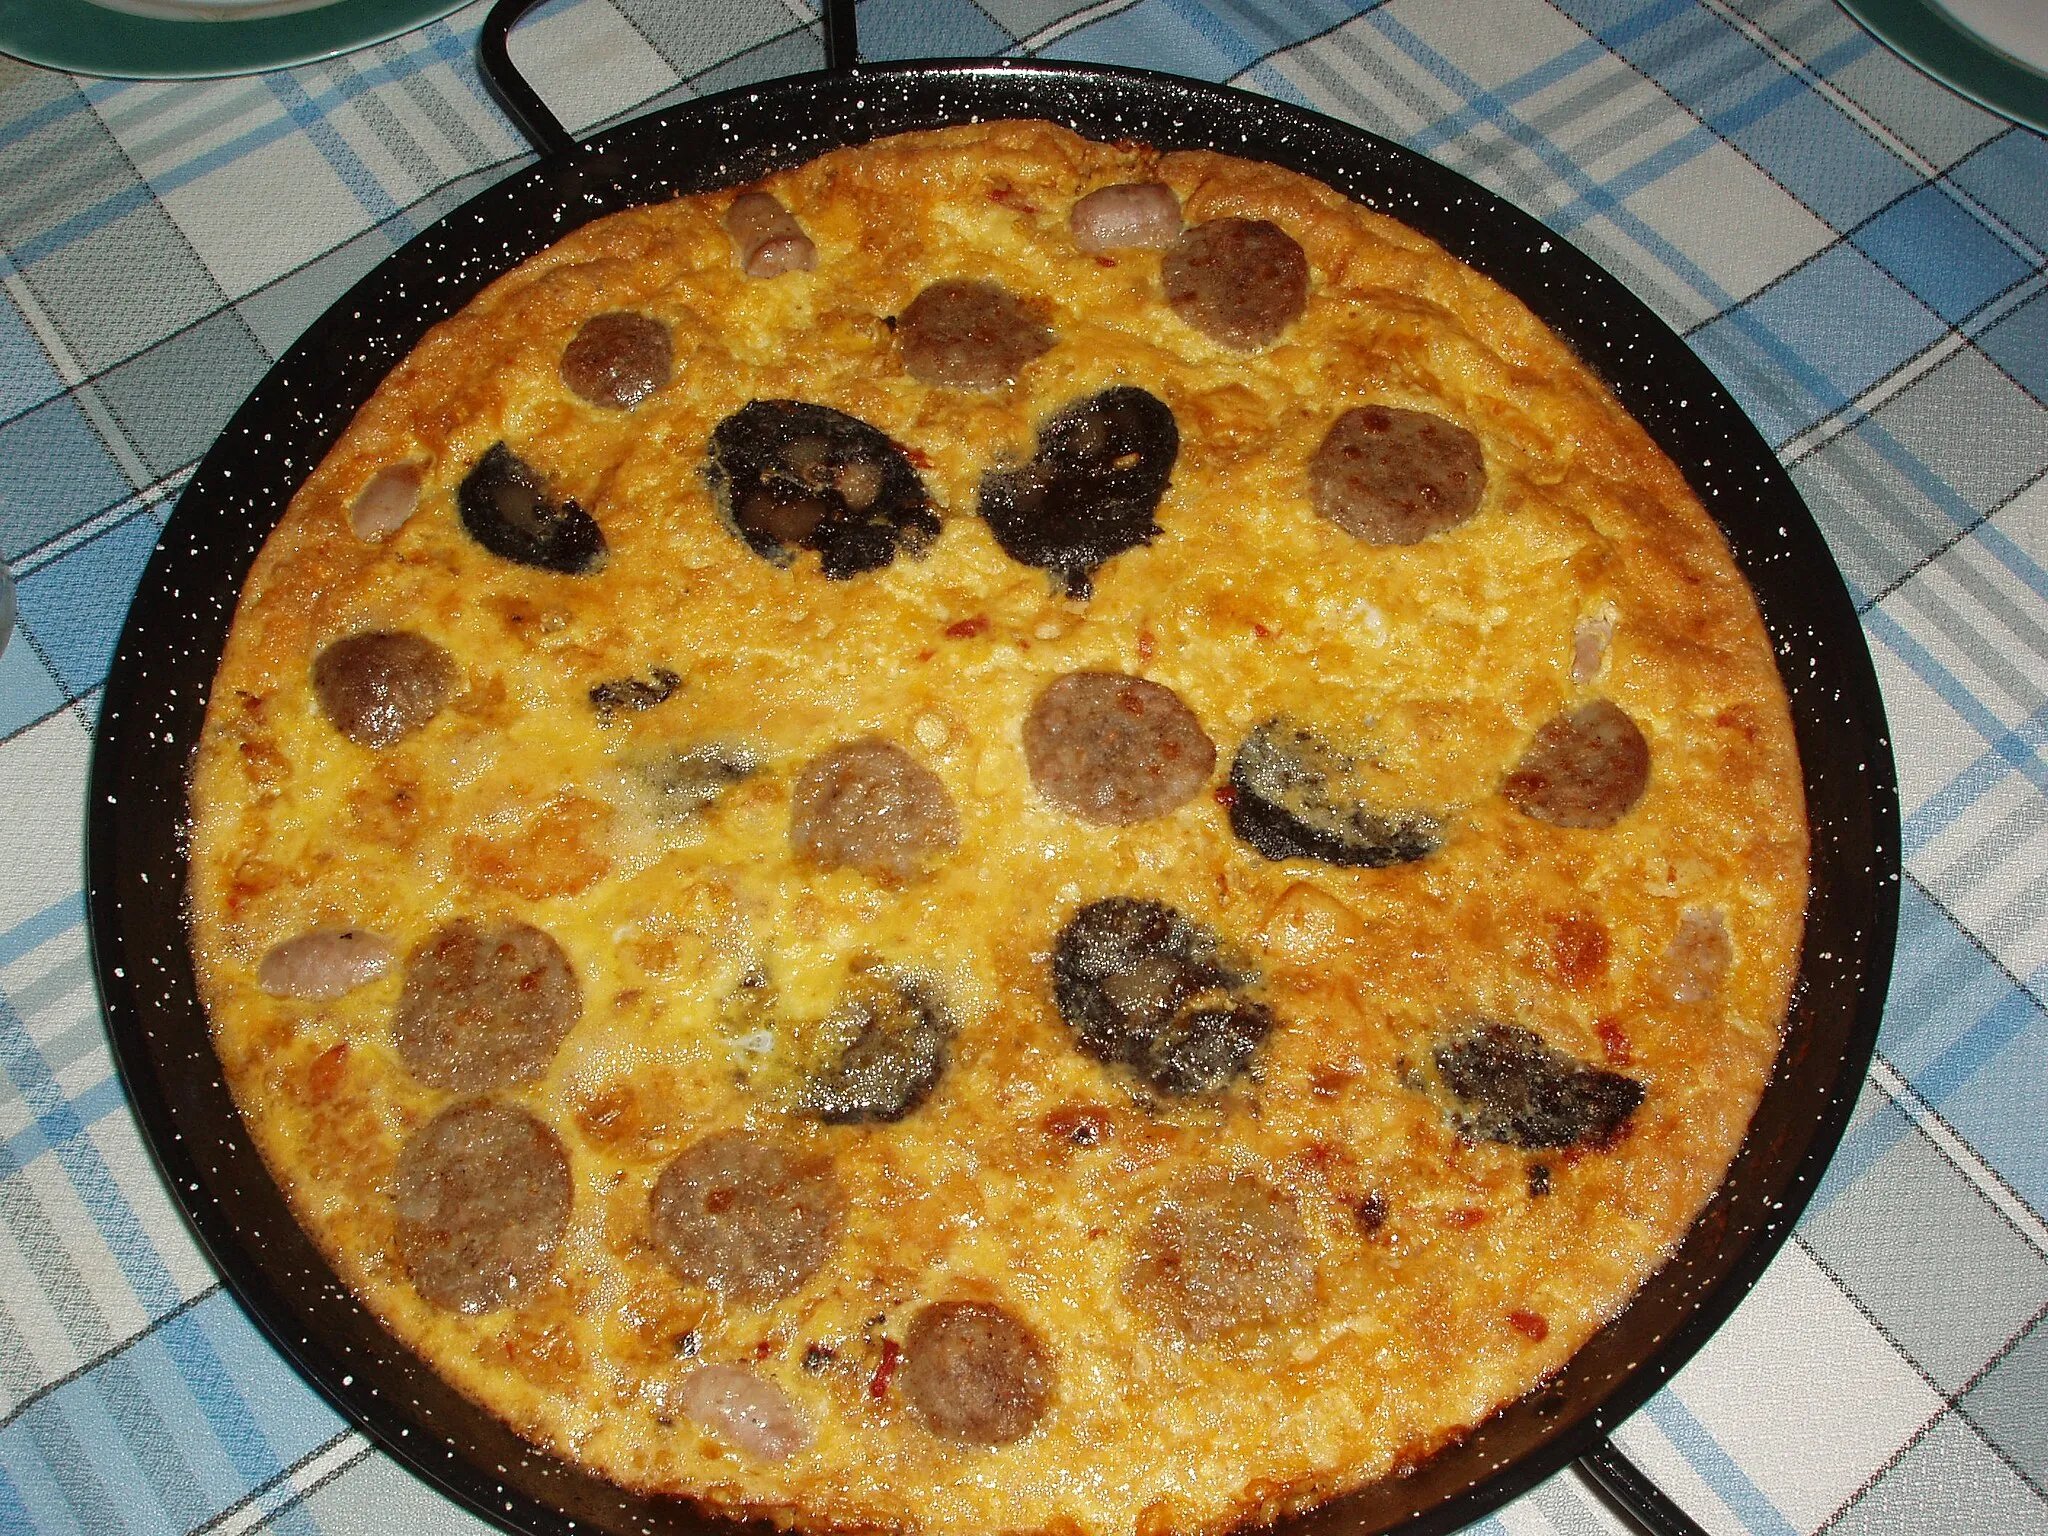 Photo showing: Arroz con costra or Arròs amb costra (Rice with crust). A typical Valencian plate made of rice wich is originated from the comarcas of Vega Baja and Baix Vinalopó, in the province of Alacant.